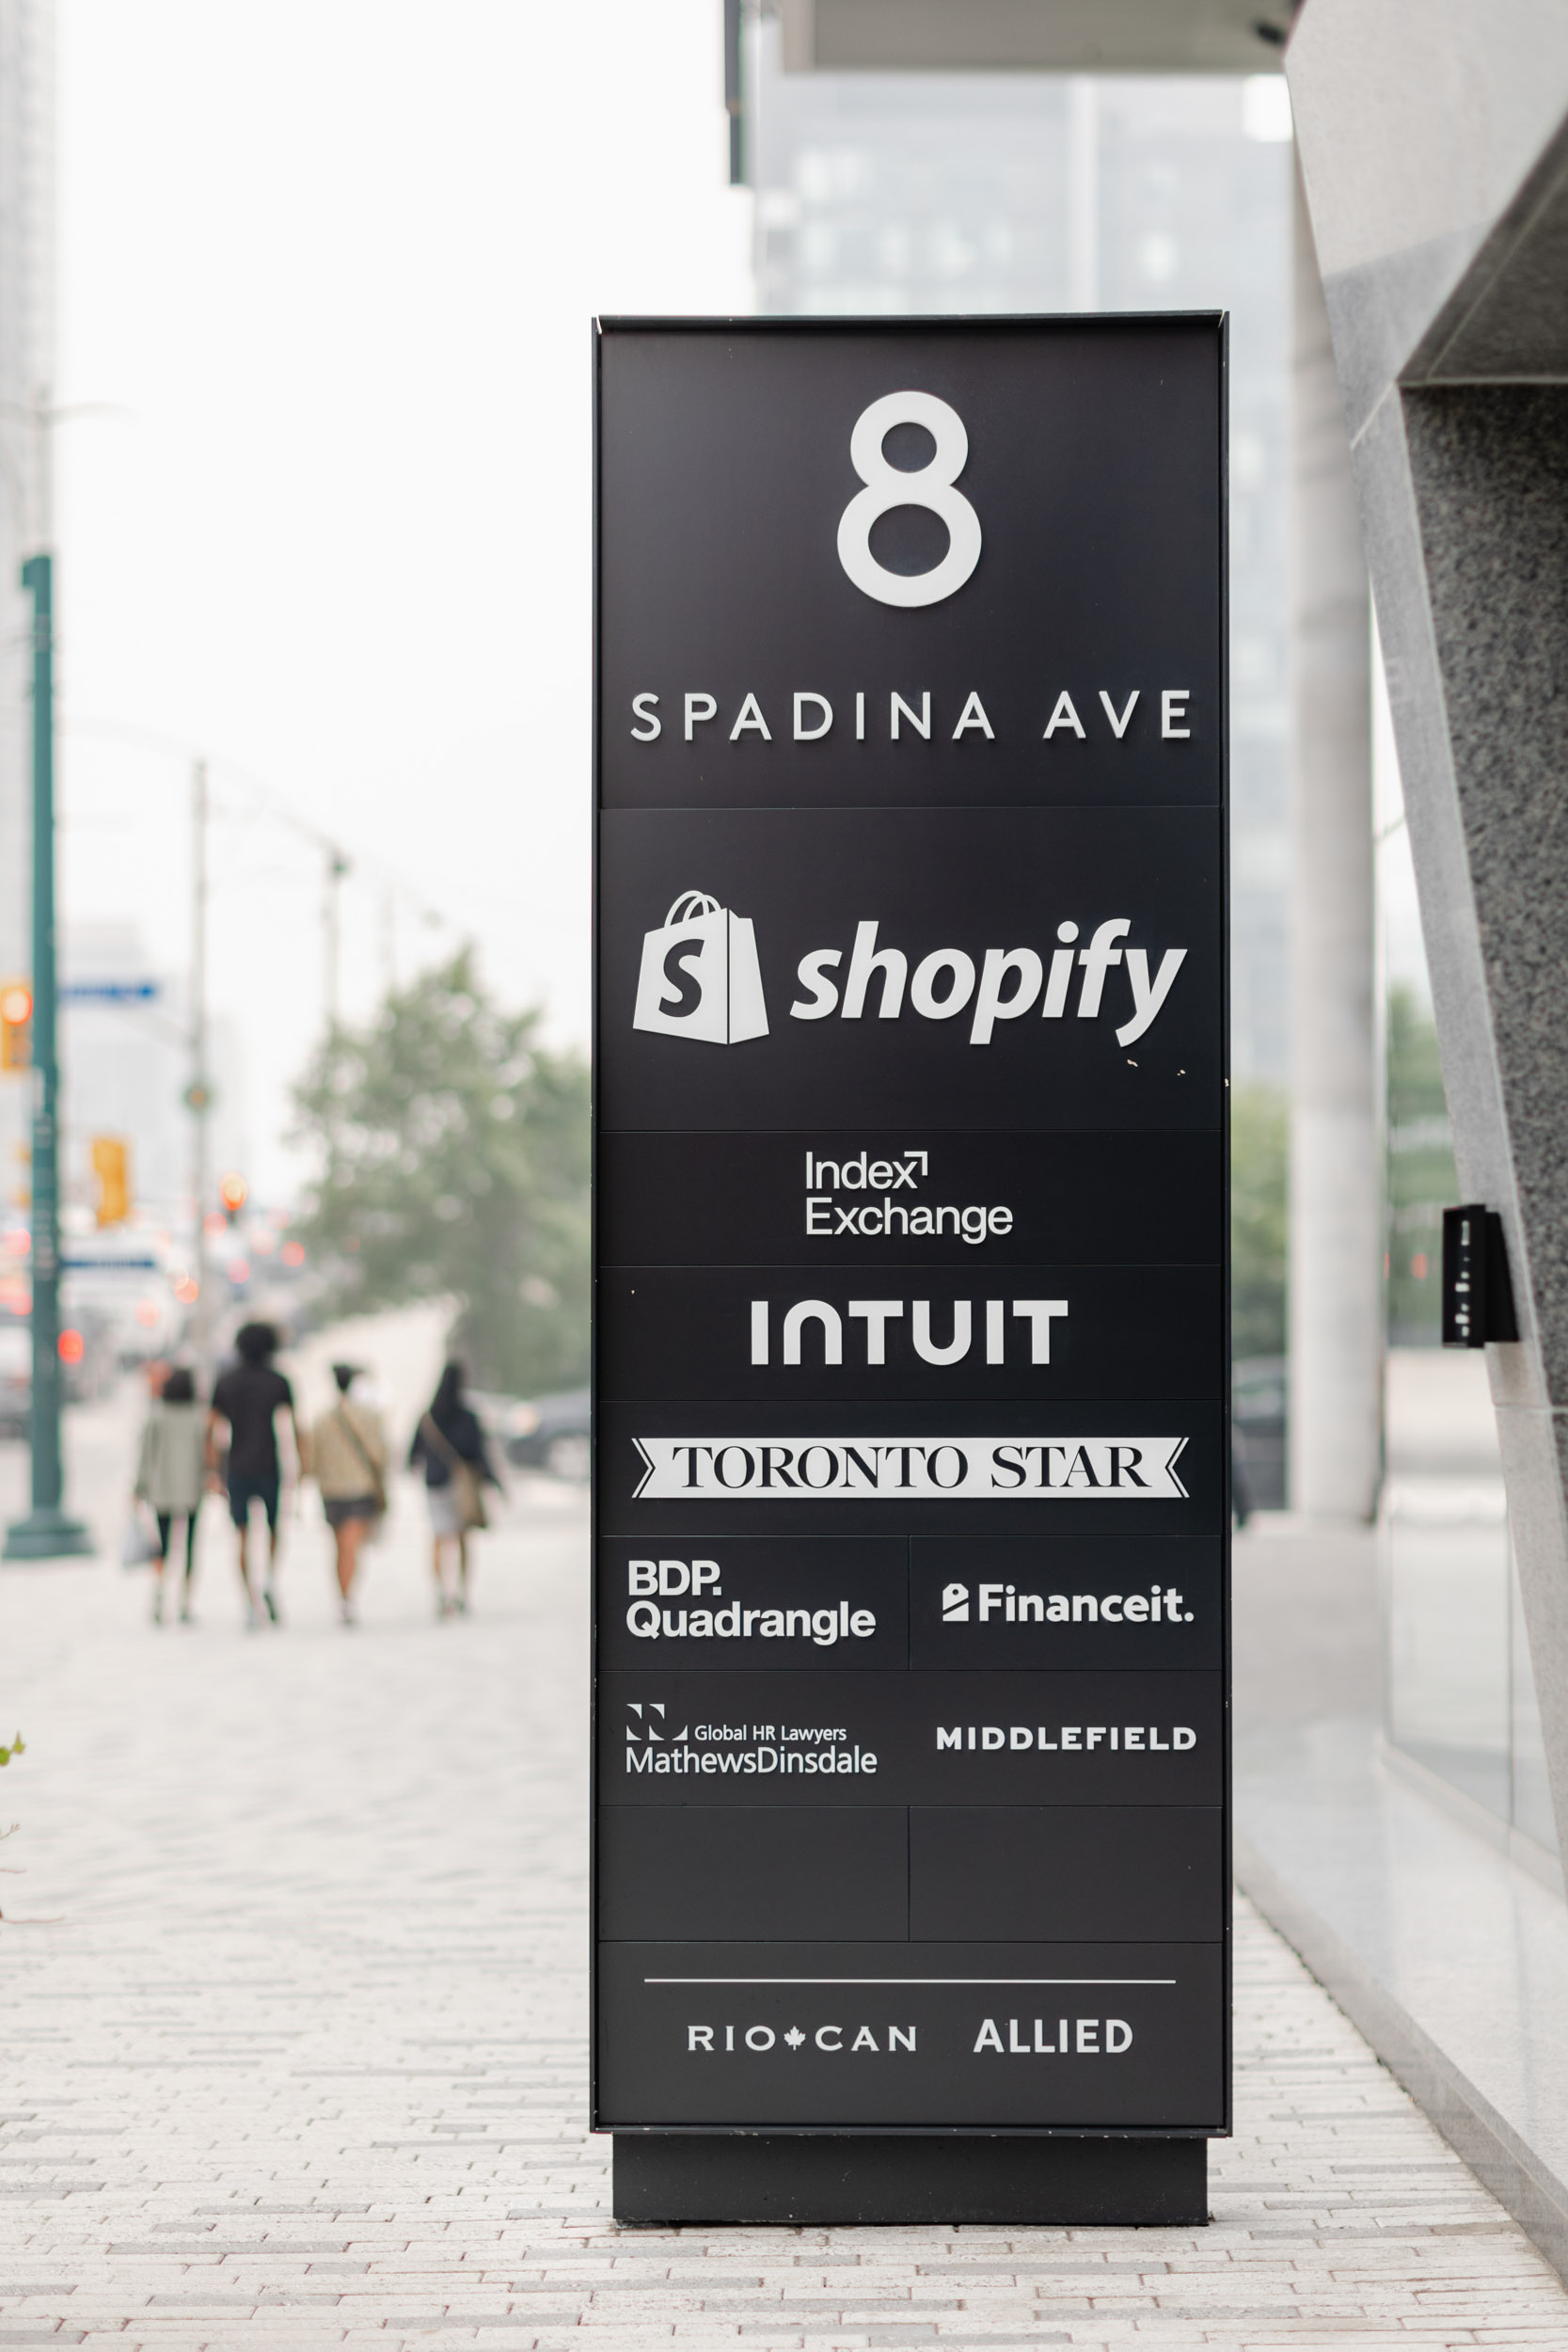 A street billboard featuring a Shopify advertisement in partnership with Index Exchange.